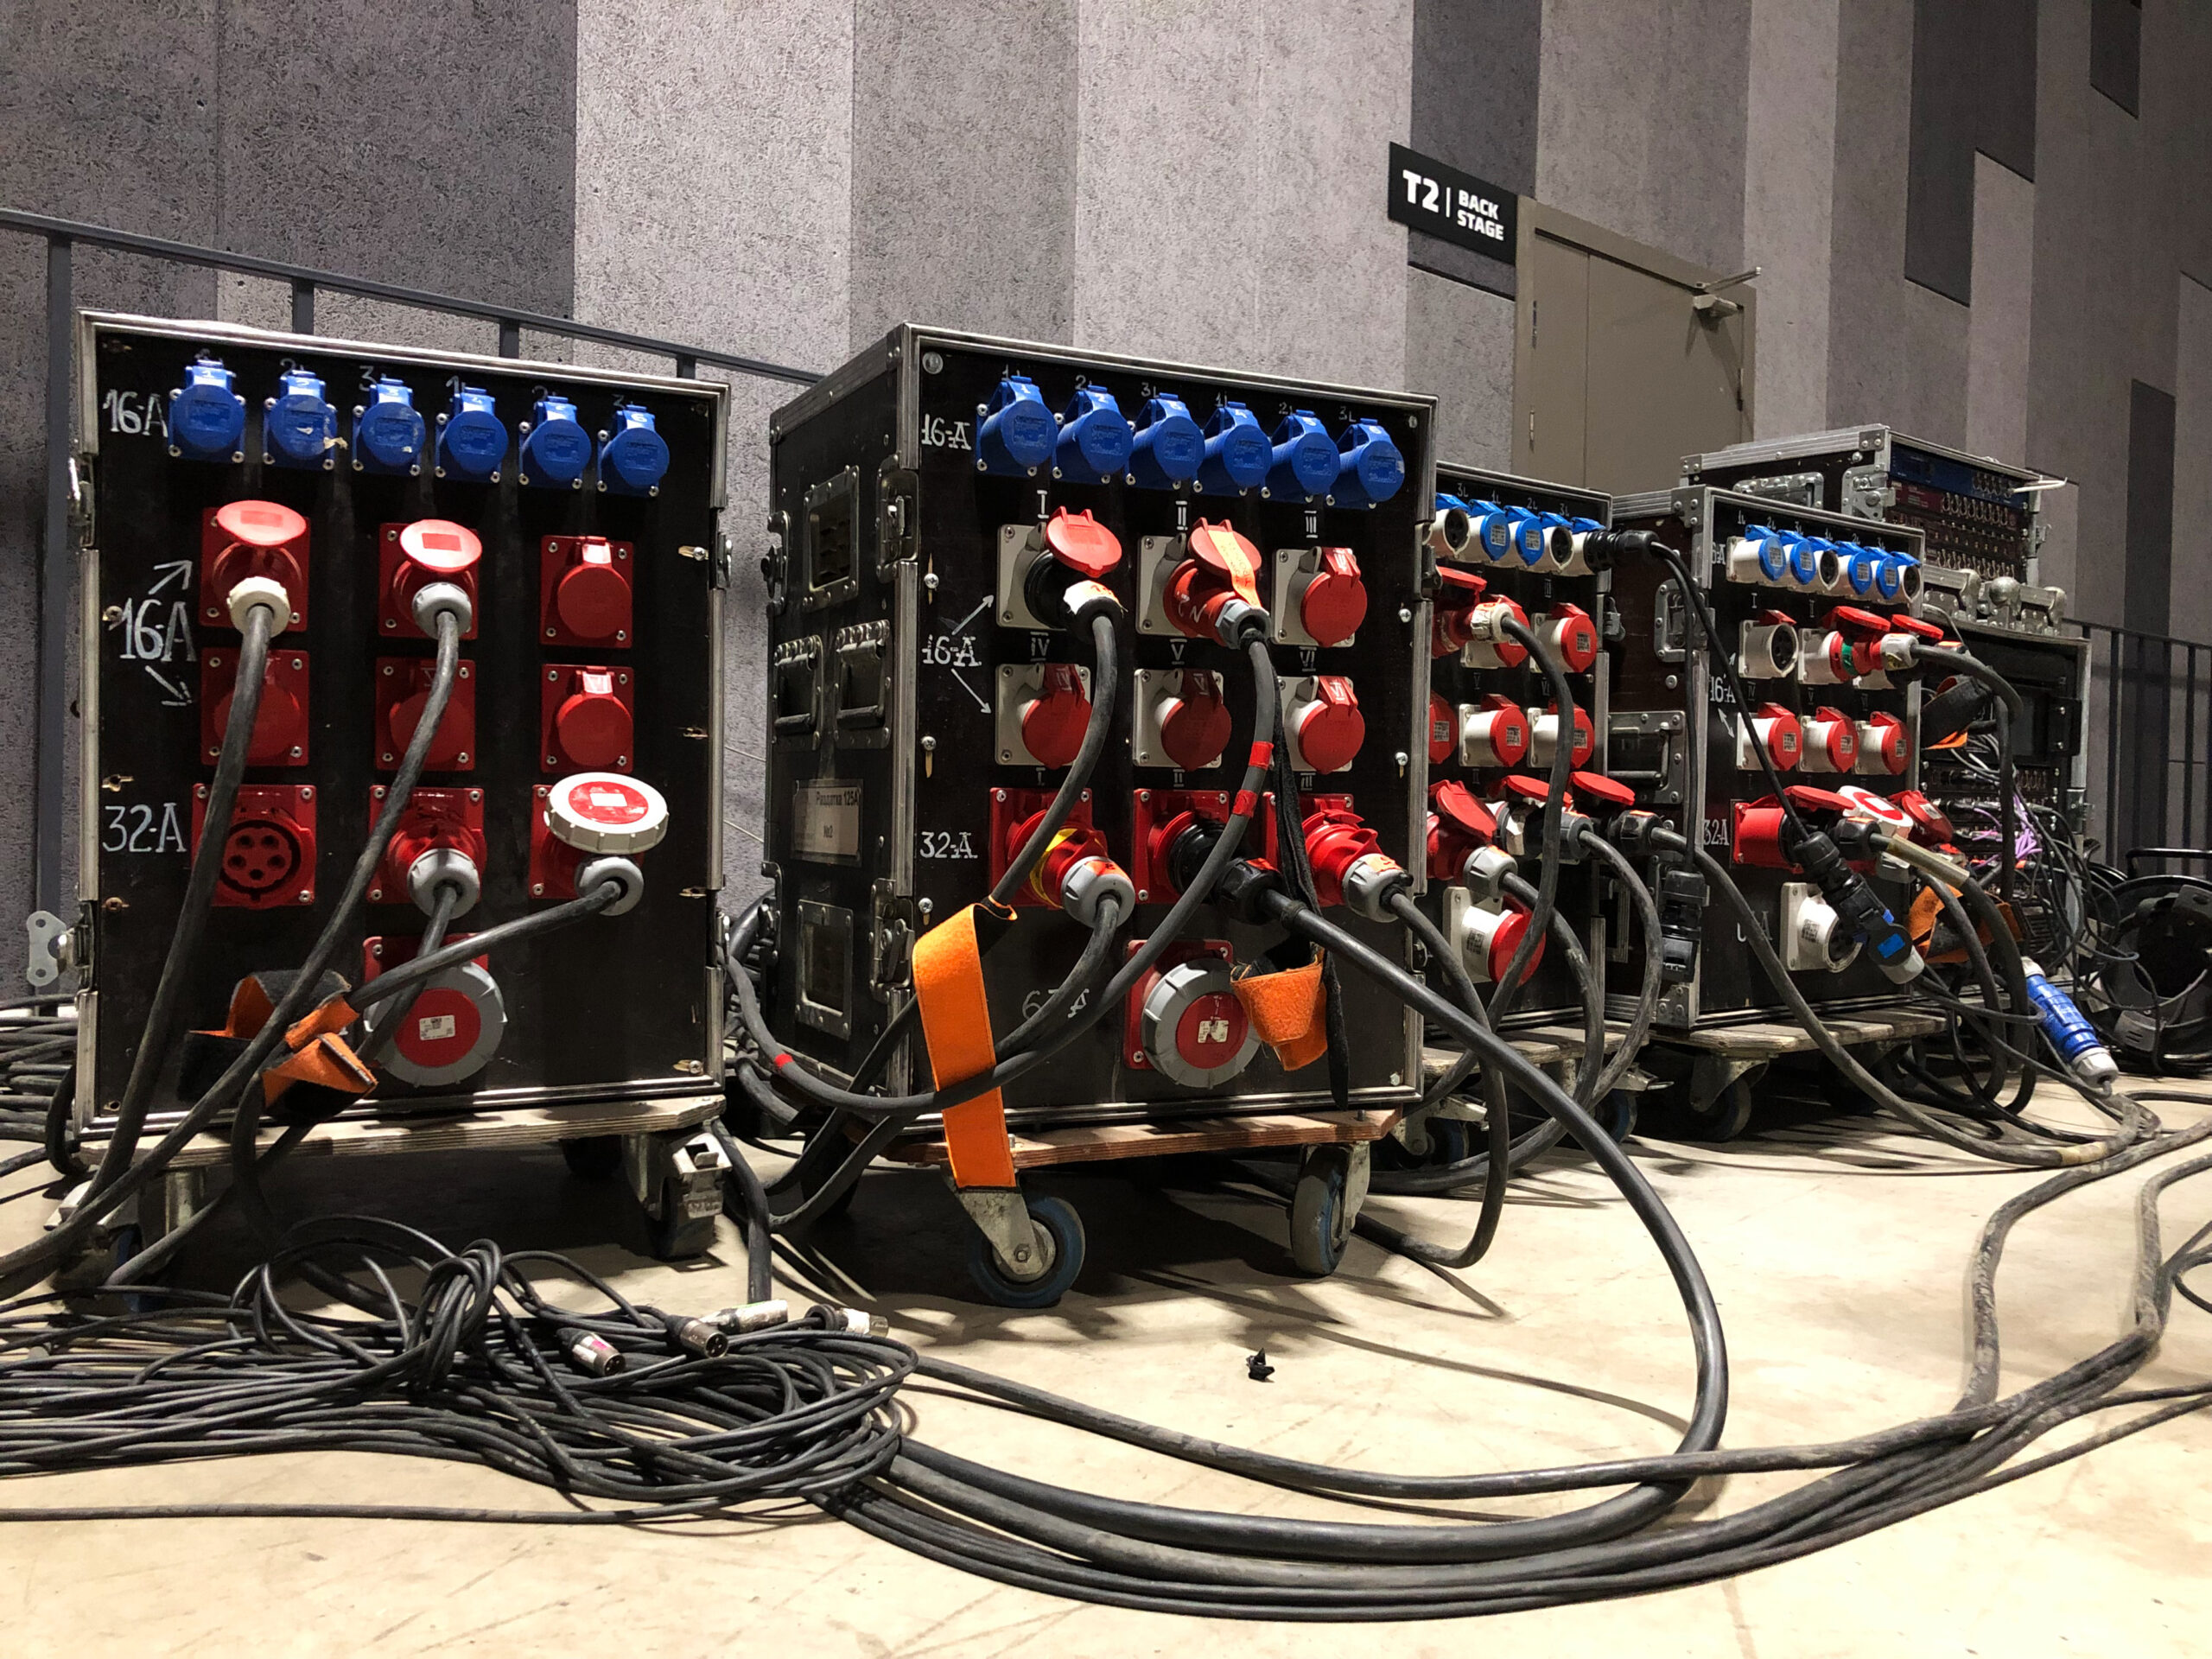 Electric power distribution boxes with power and signal cables. Installation of professional equipment for a concert.